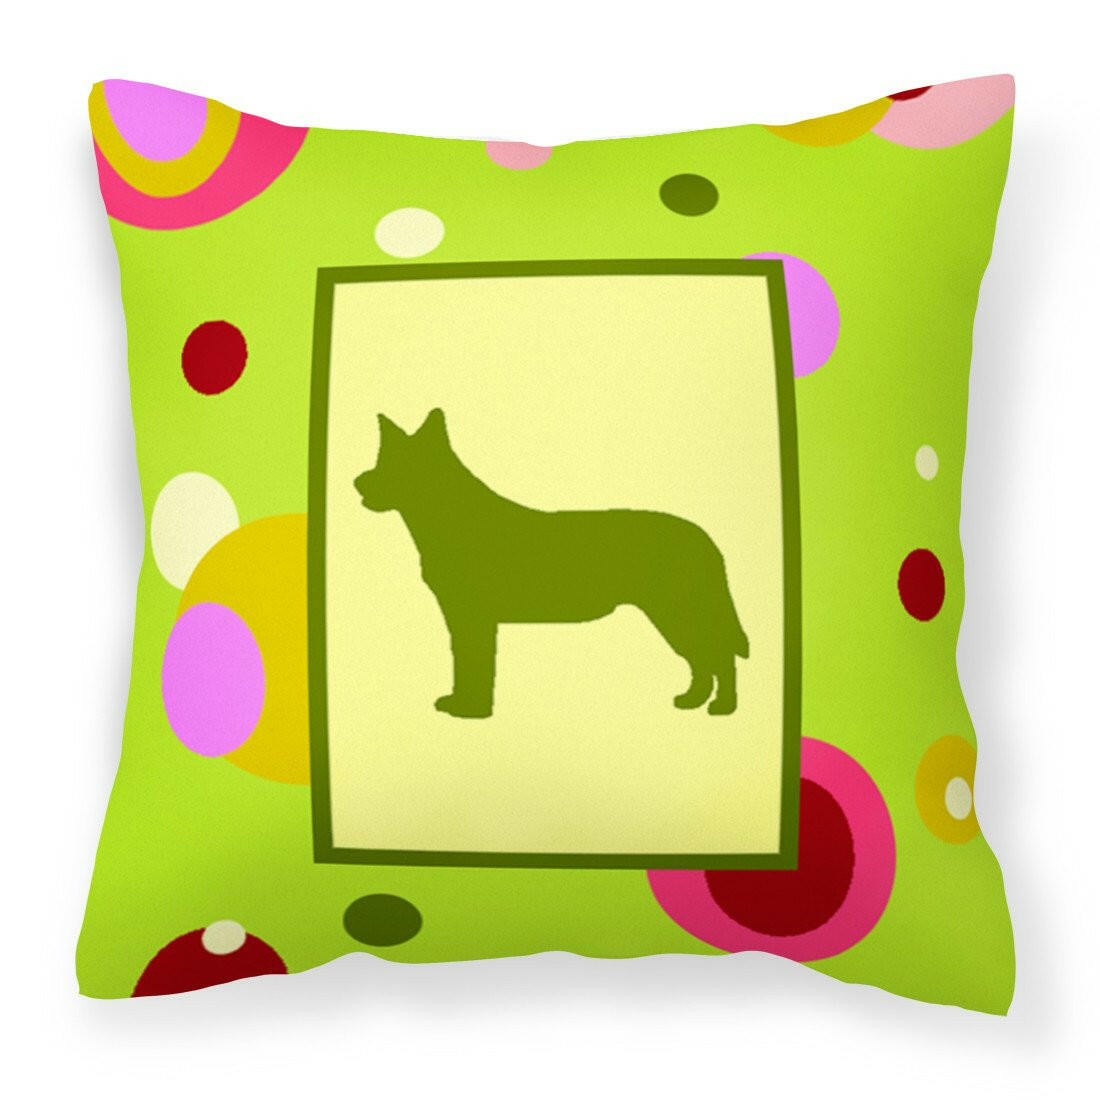 Lime Green Dots Australian Cattle Dog Fabric Decorative Pillow CK1110PW1414 by Caroline's Treasures